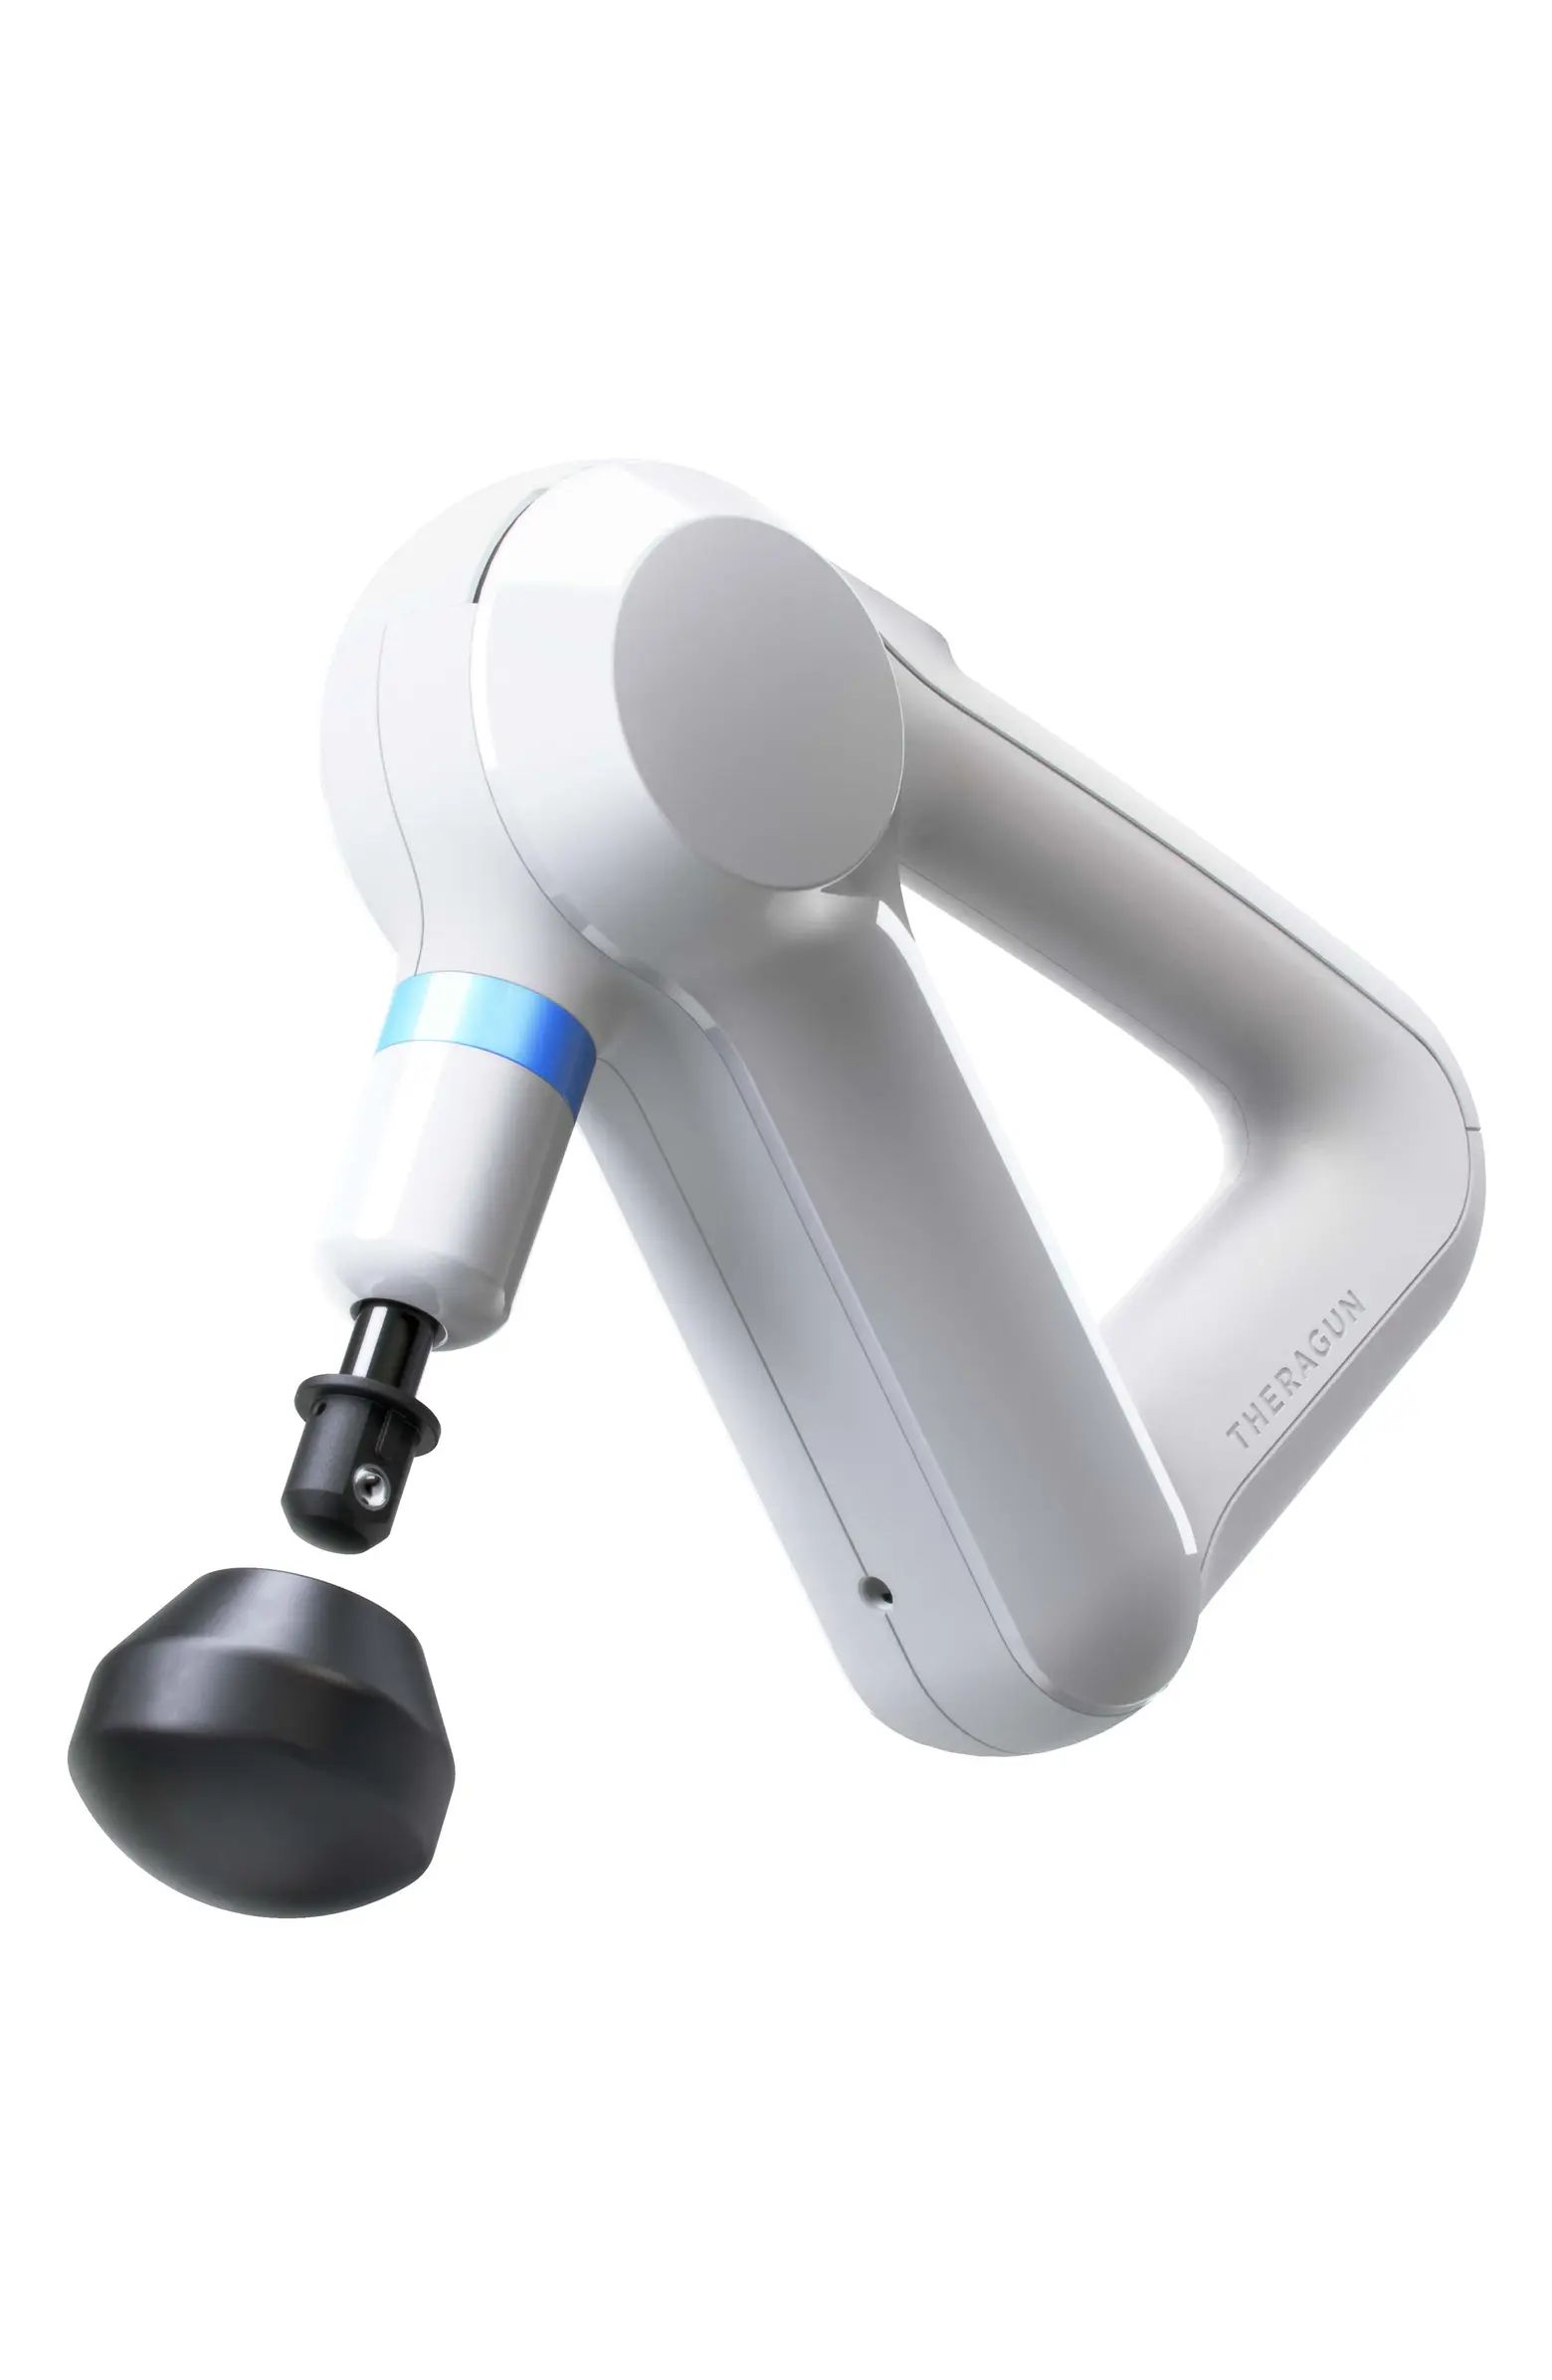 Therabody Theragun Elite Percussive Therapy Massager | Nordstrom | Nordstrom